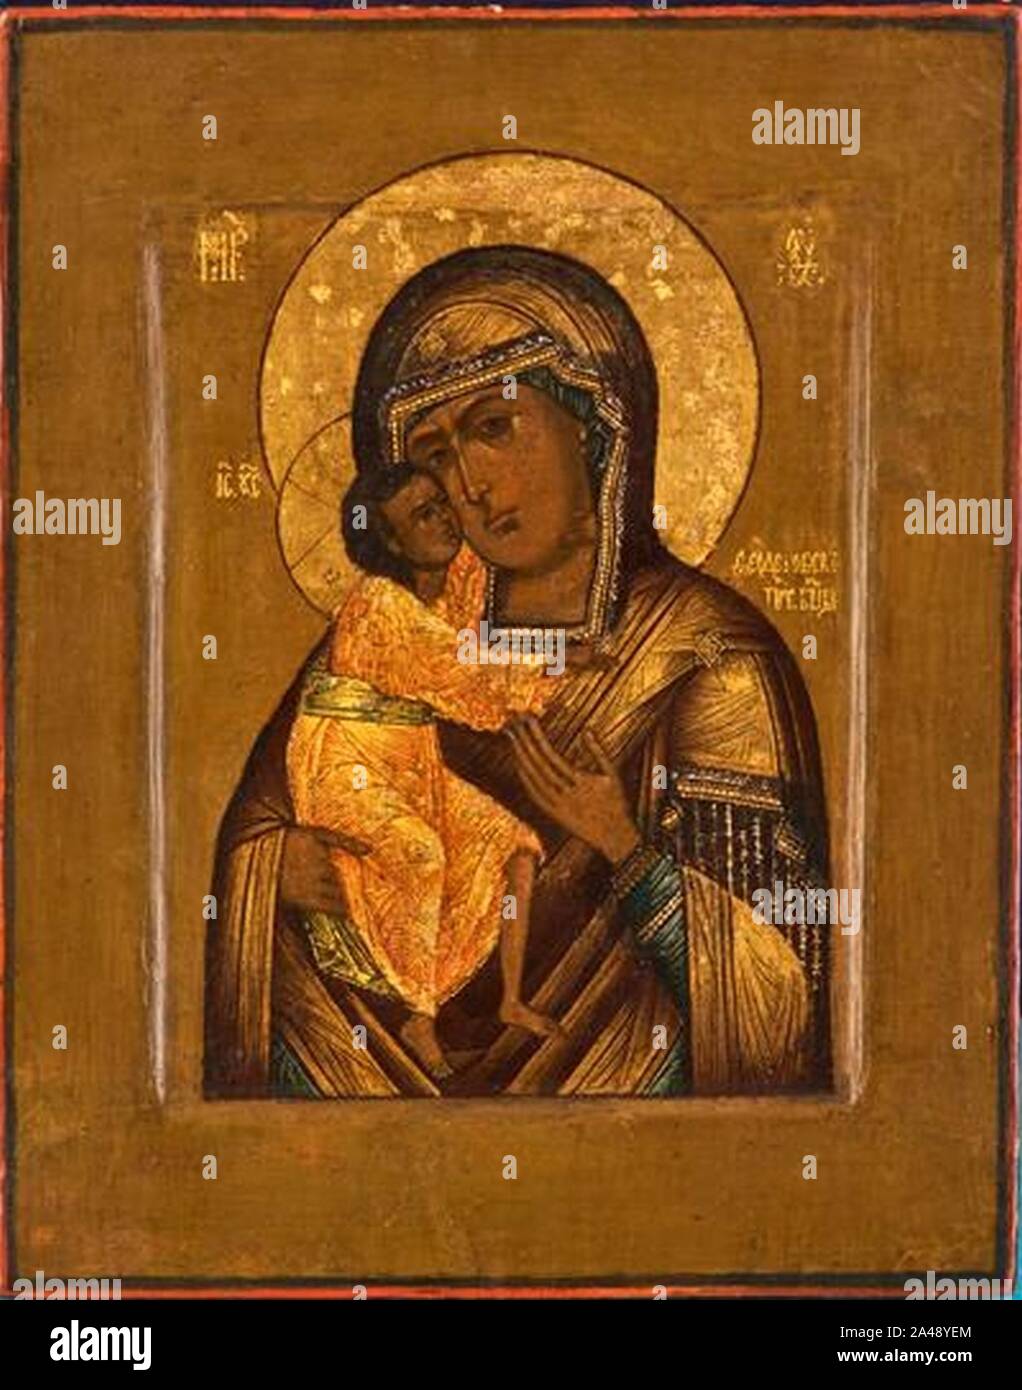 Feodorovskaya in cut-back centre portion of the icon panel. Stock Photo